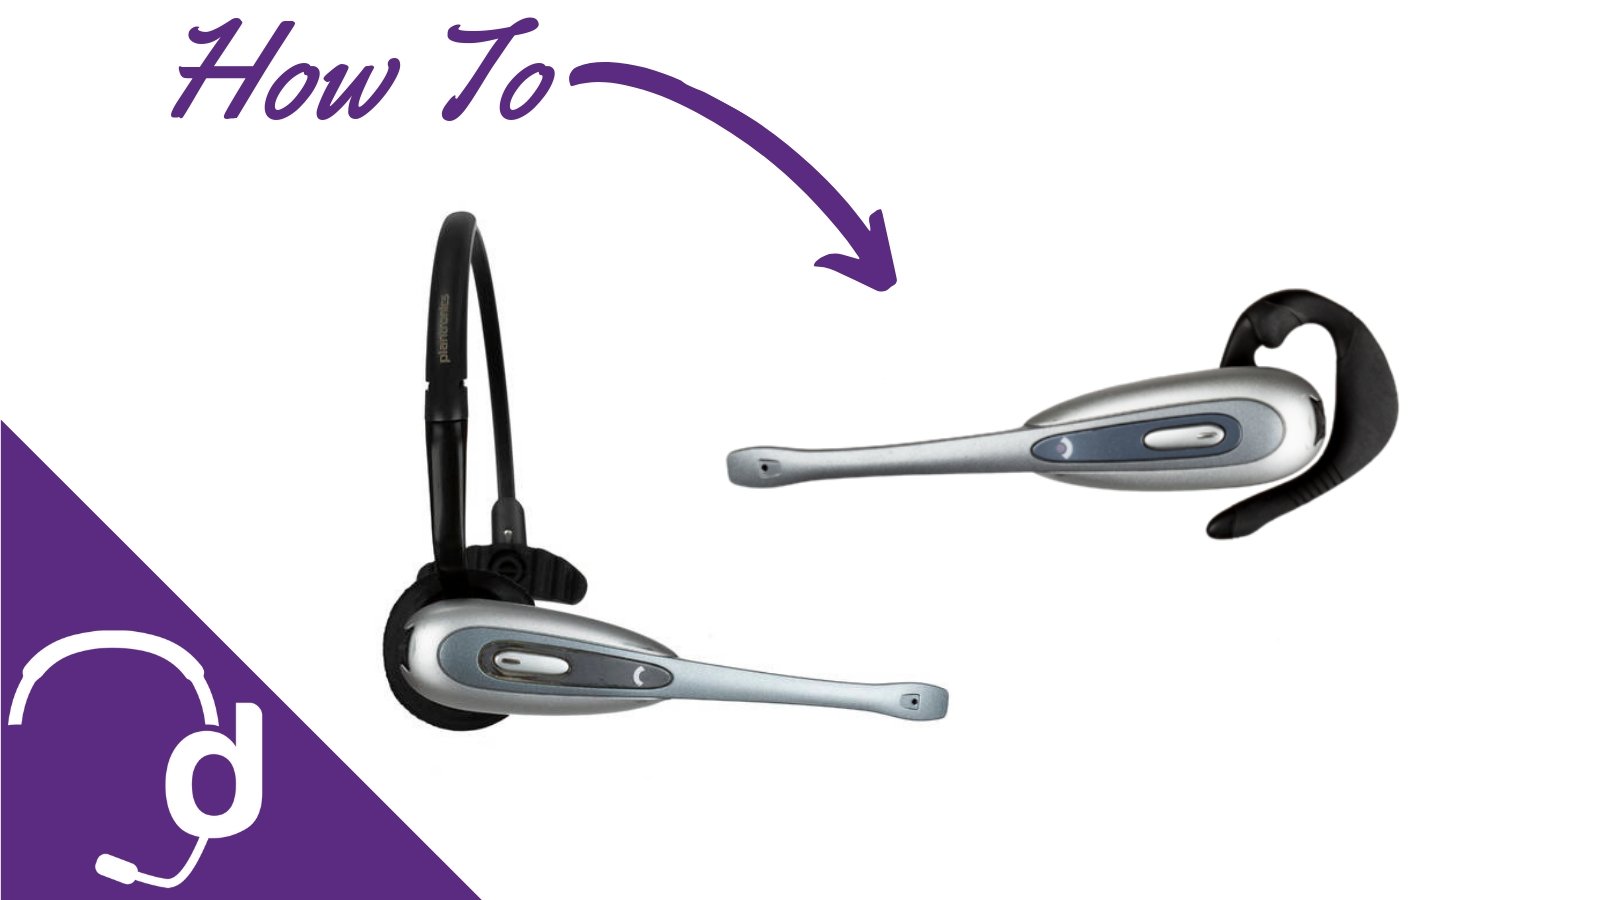 2 Simple Steps To Switch Your Plantronics CS50 or CS55 From An Ear Hook To Headband - Headset Advisor